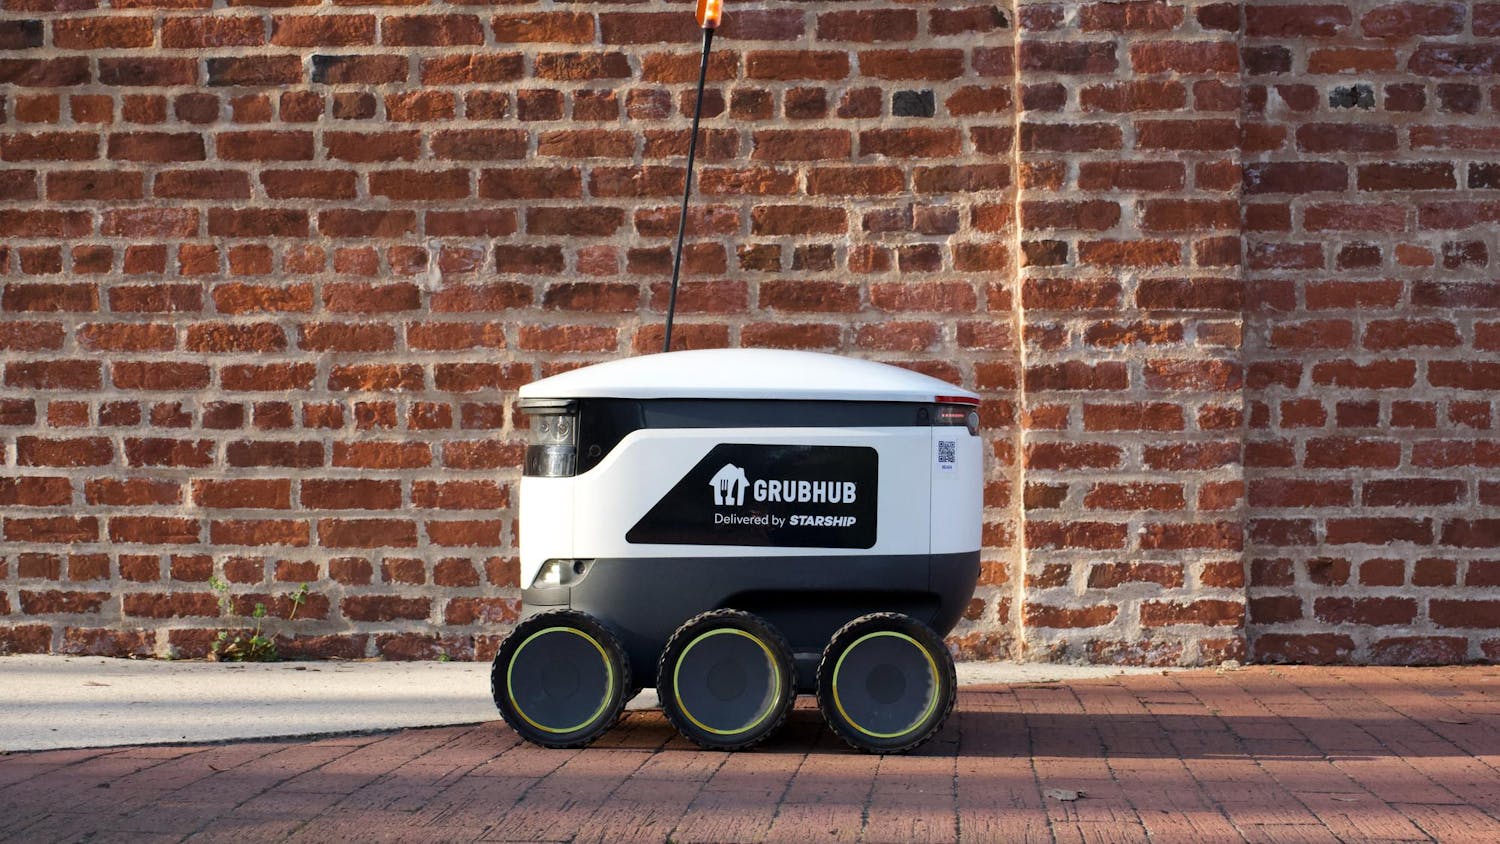 A University of South Carolina Grubhub robot zooming along Greene Street on Feb. 25, 2024. The university has implemented a new food delivery system for students to use on campus where small, six-wheeled robots deliver them food at their request if ordered through the Grubhub app.